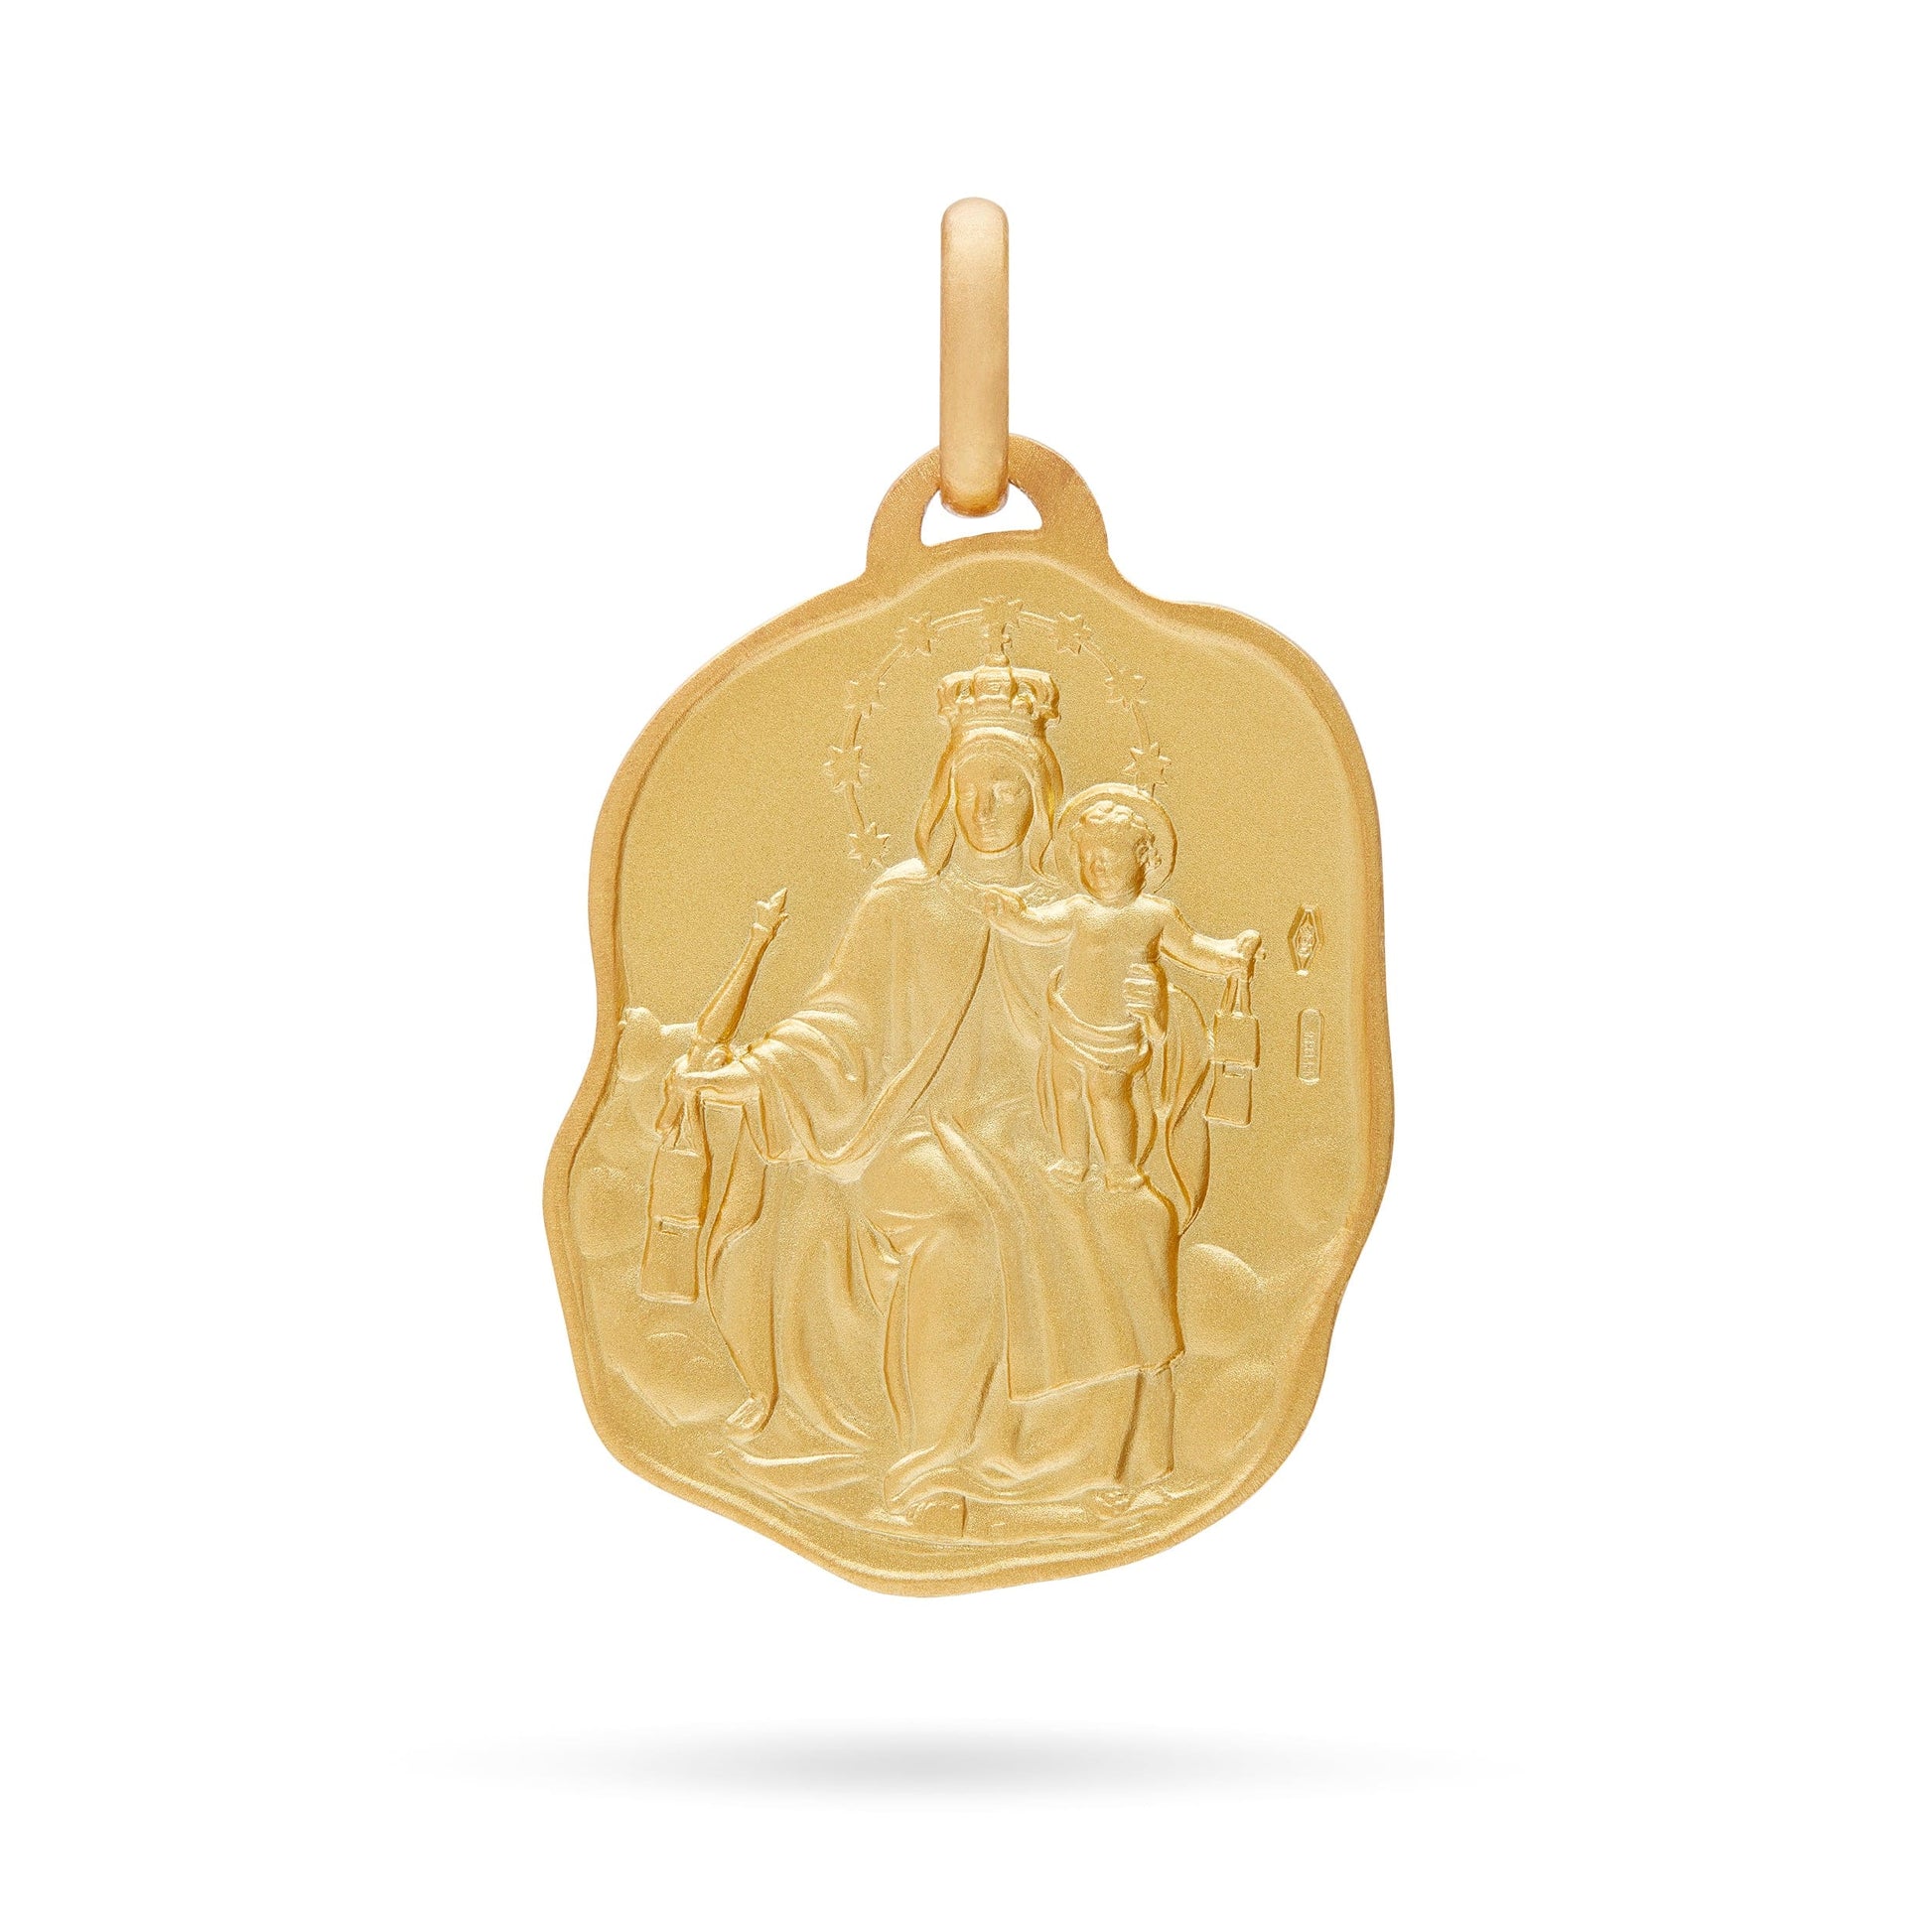 MONDO CATTOLICO Jewelry 25 mm (0.98 in) Scapular Gold Medal